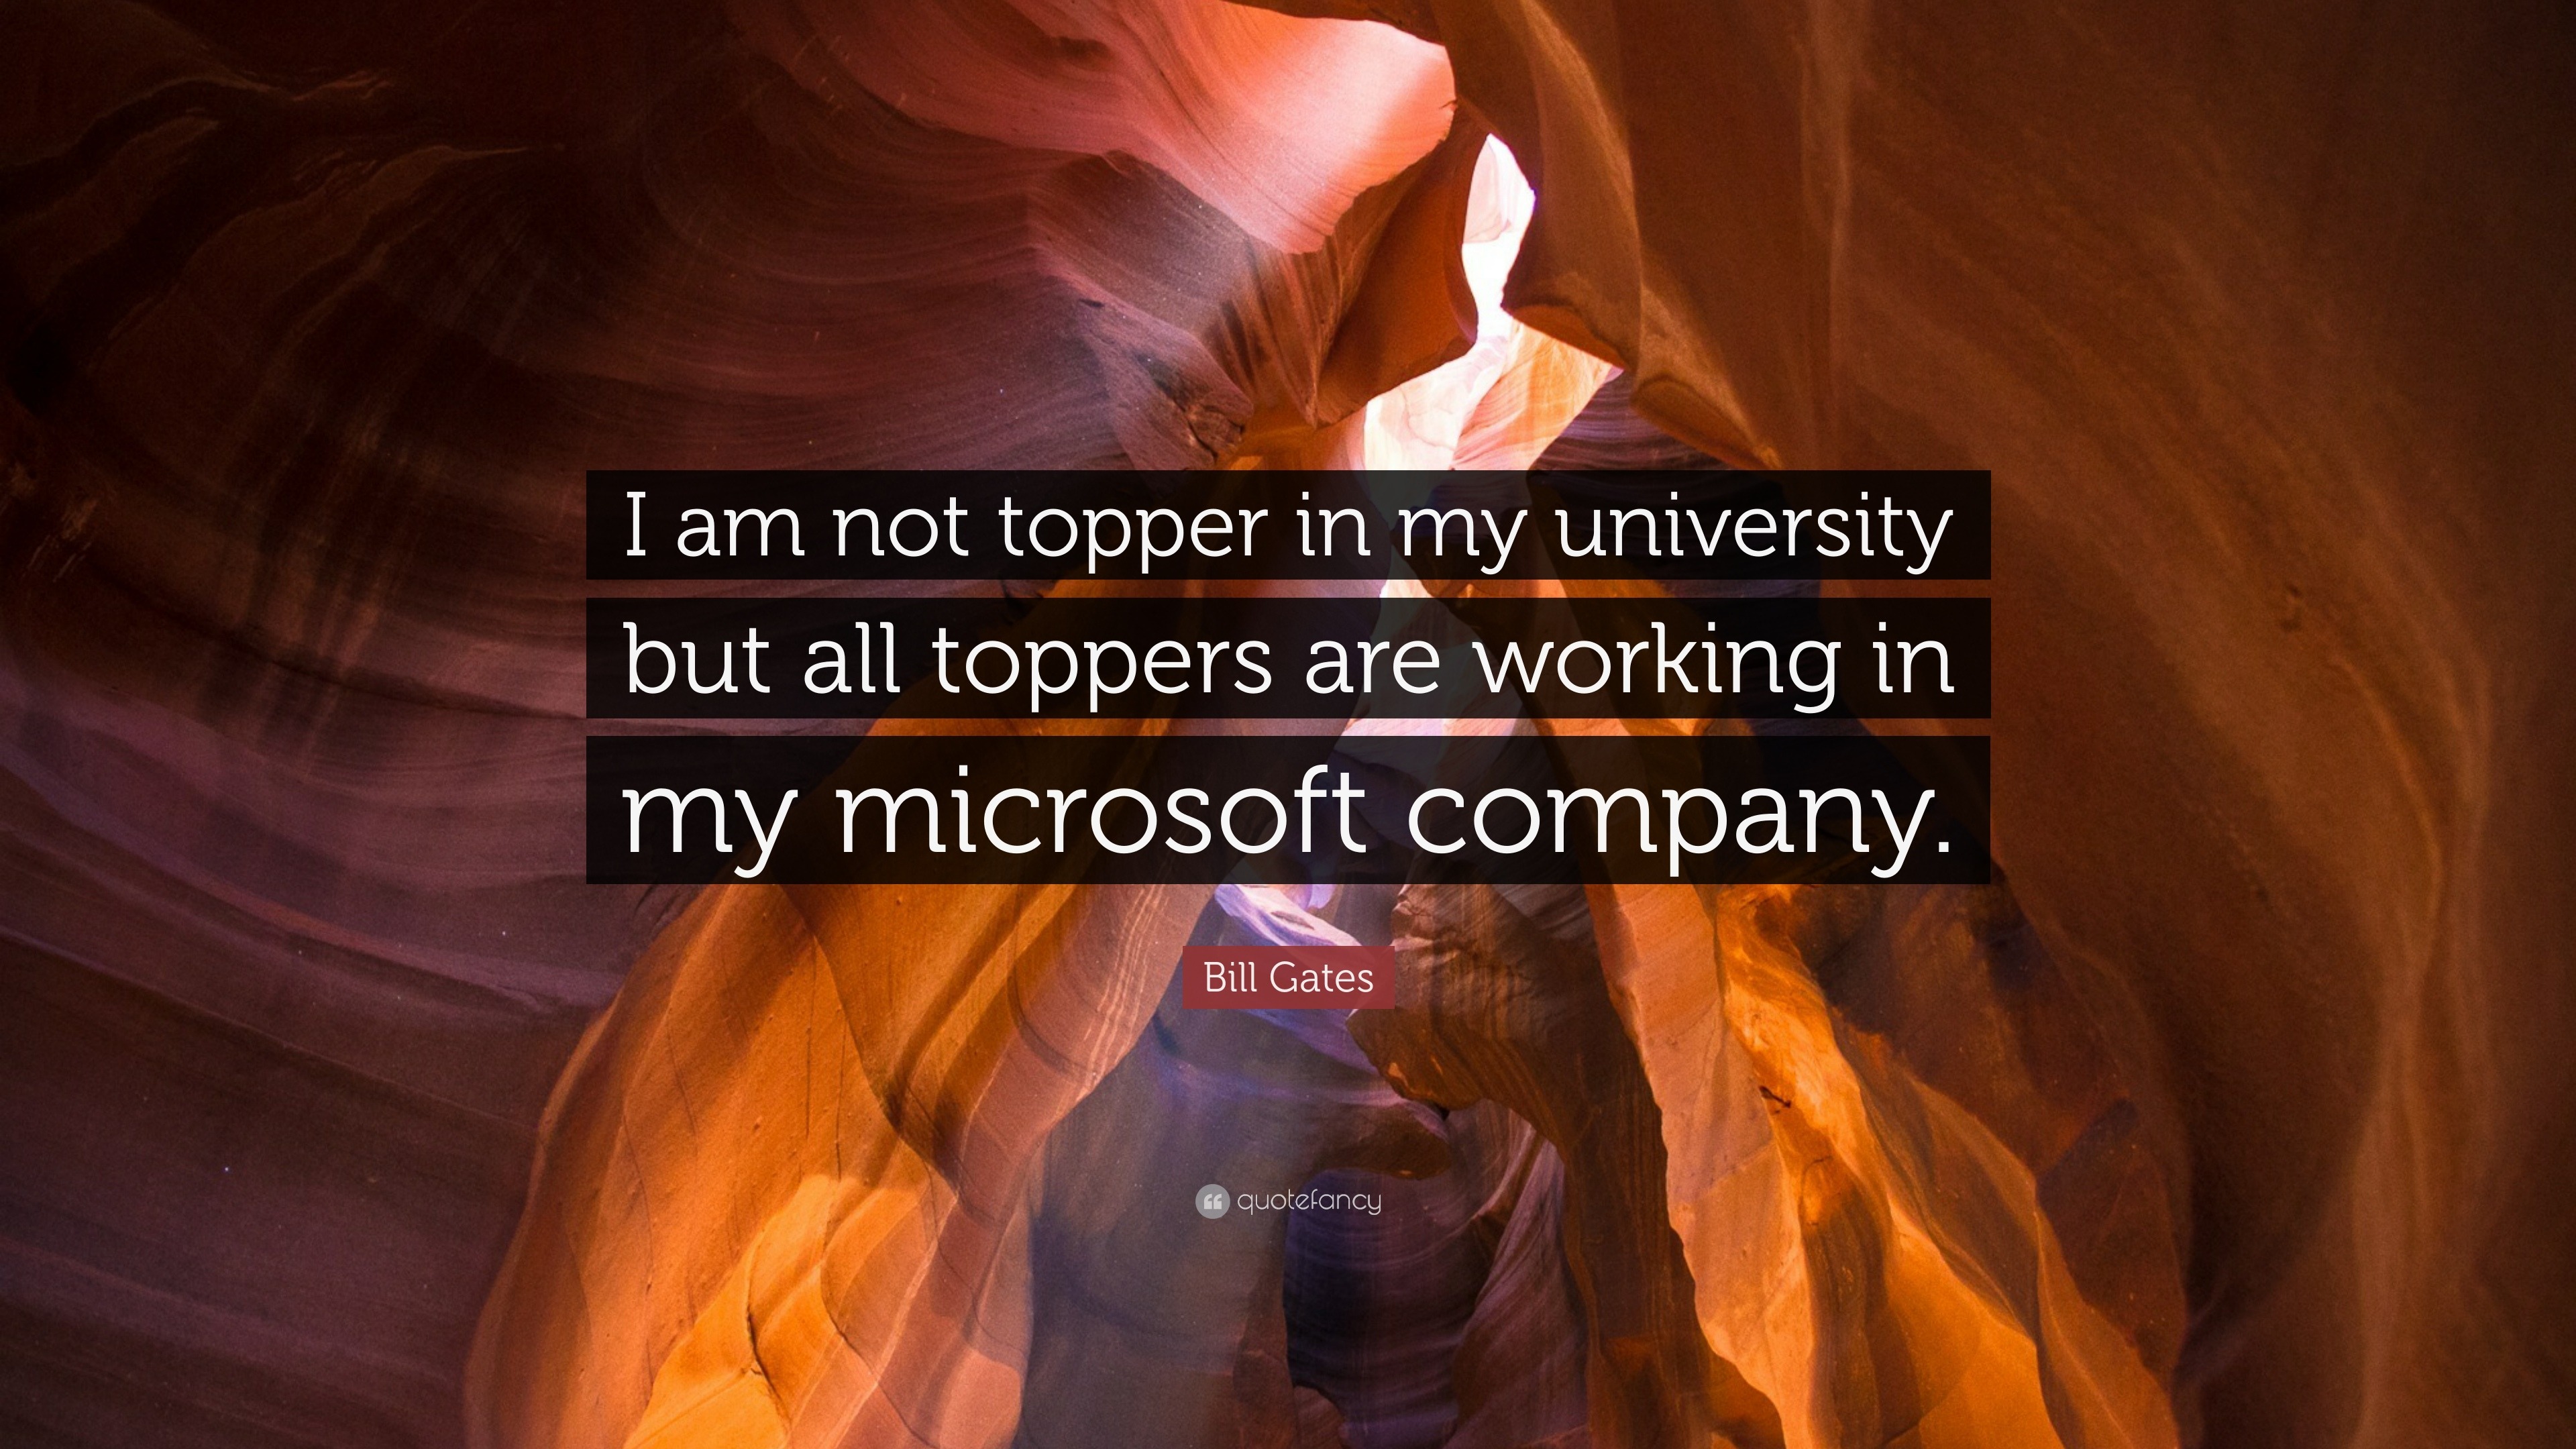 Bill Gates Quote: “I am not topper in my university but all toppers are  working in